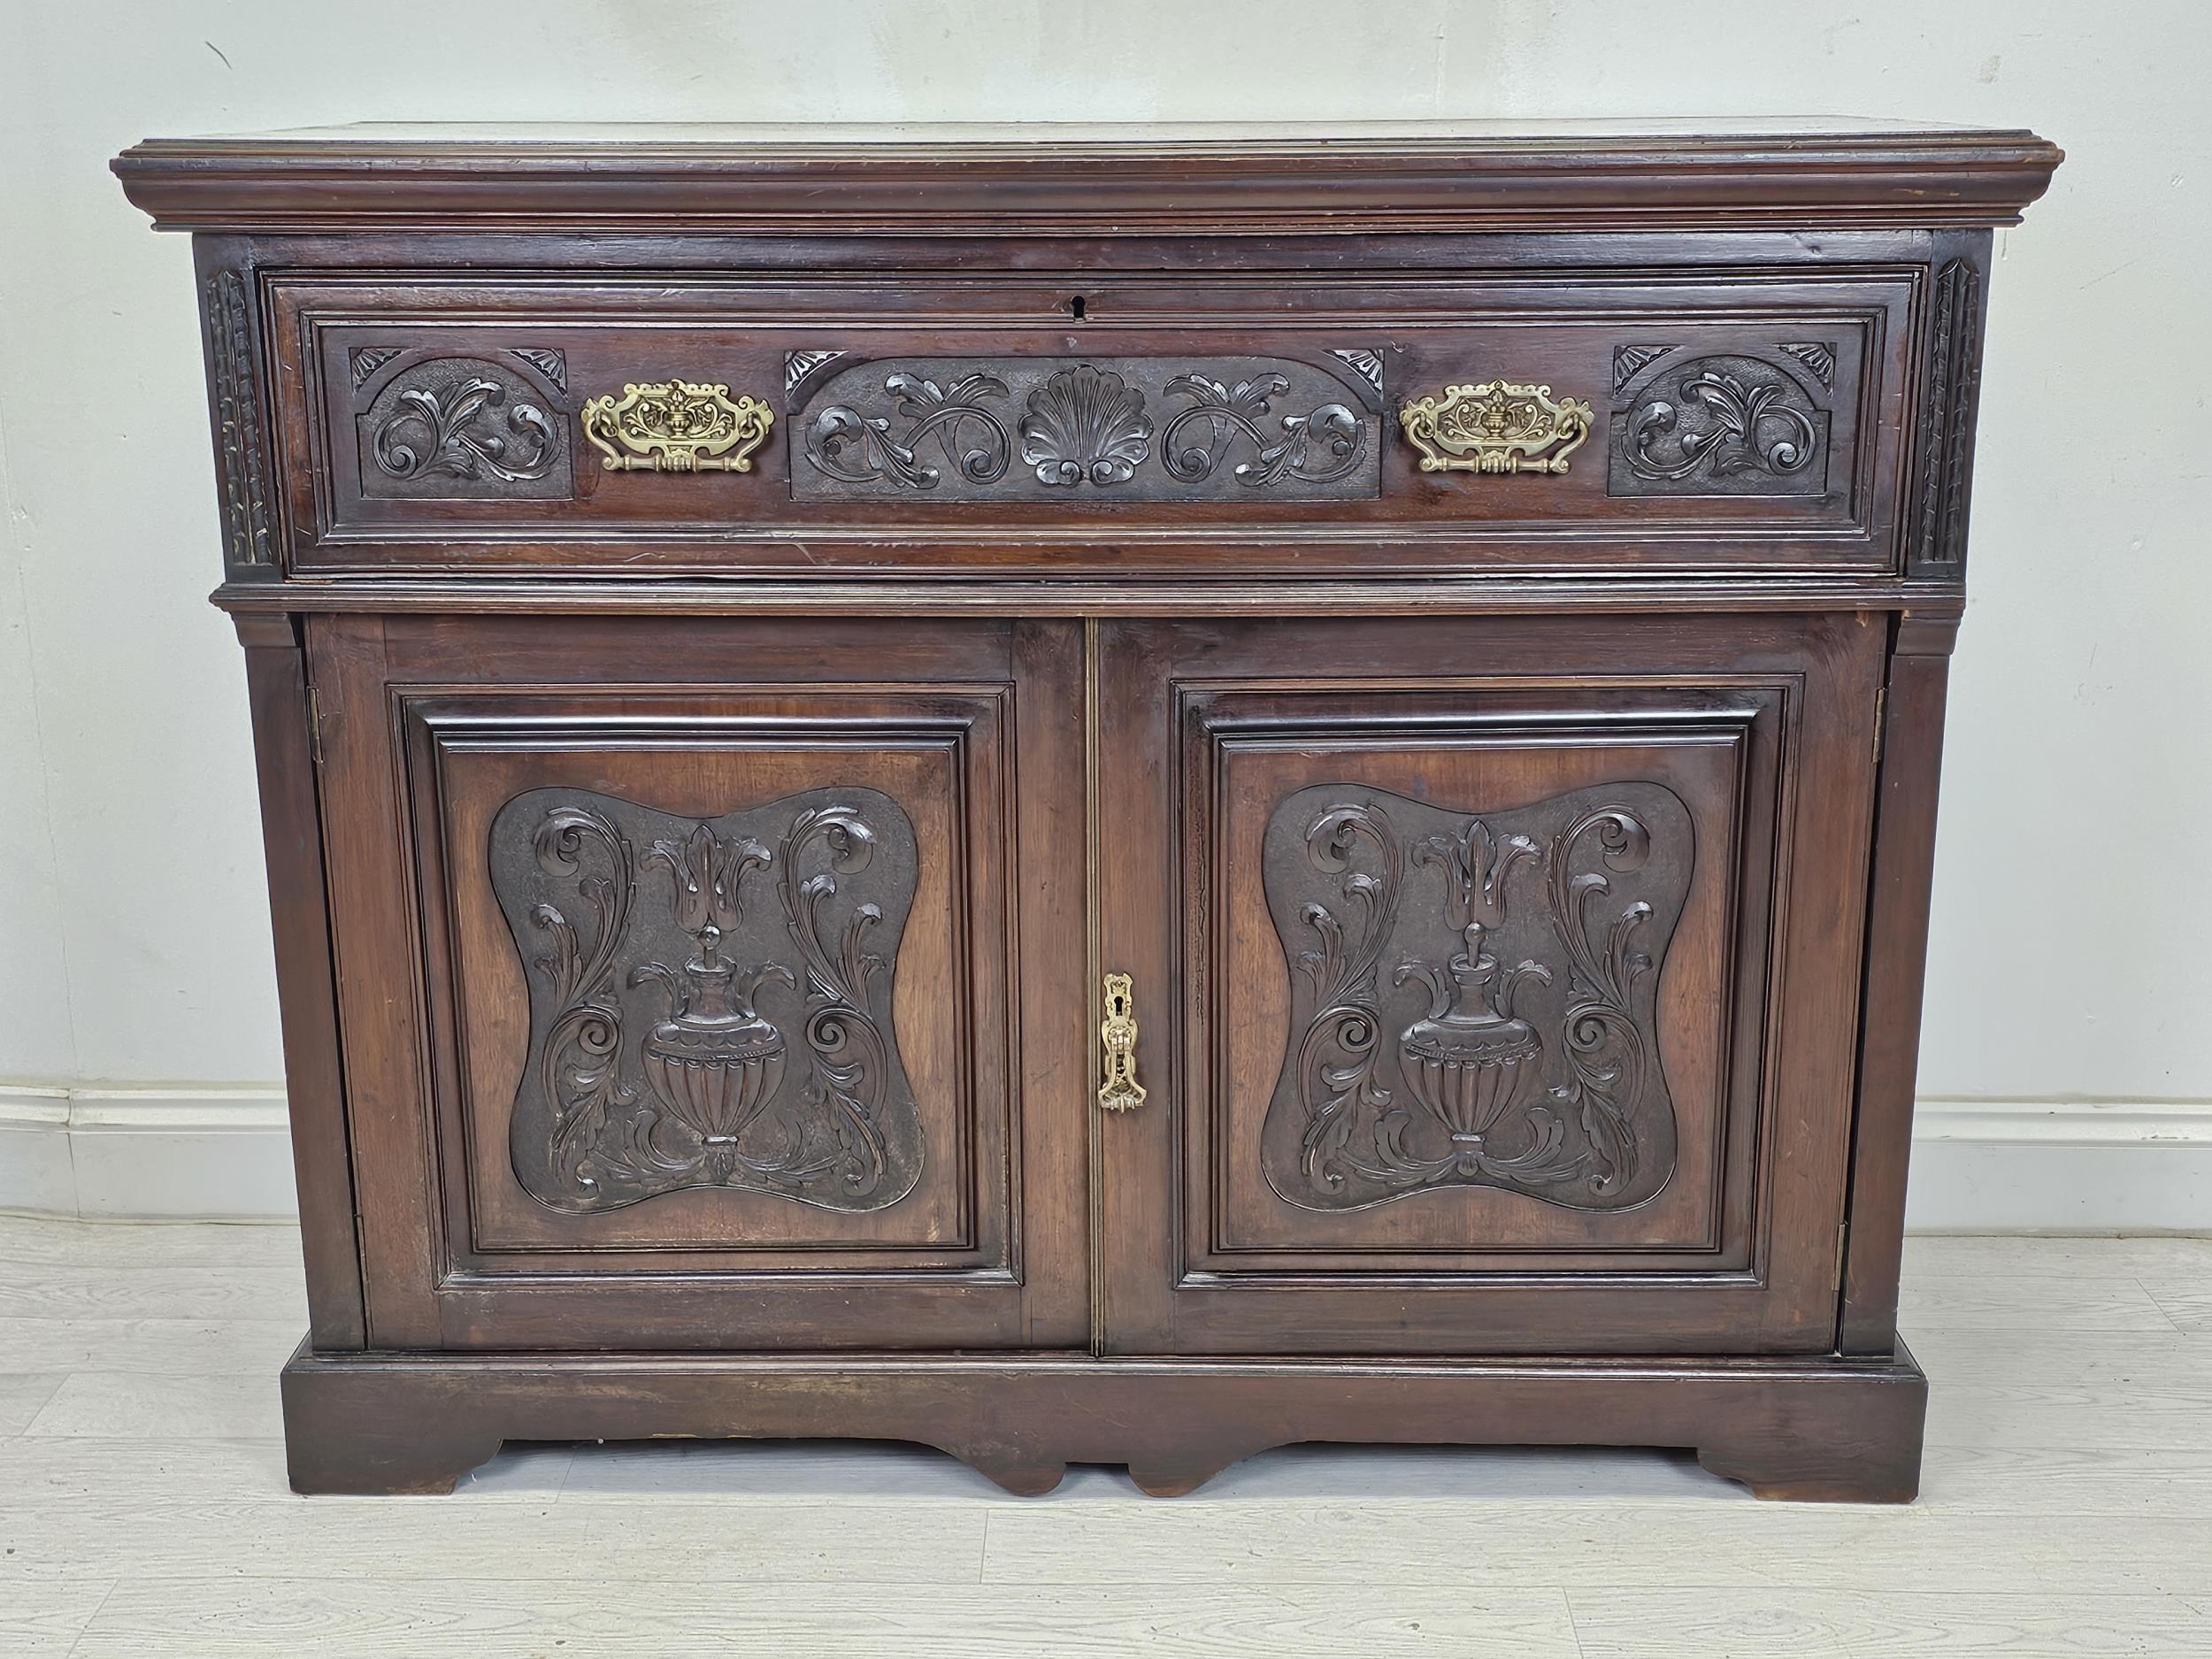 Secretaire cabinet, 19th century carved walnut with fall front revealing well fitted interior. H.100